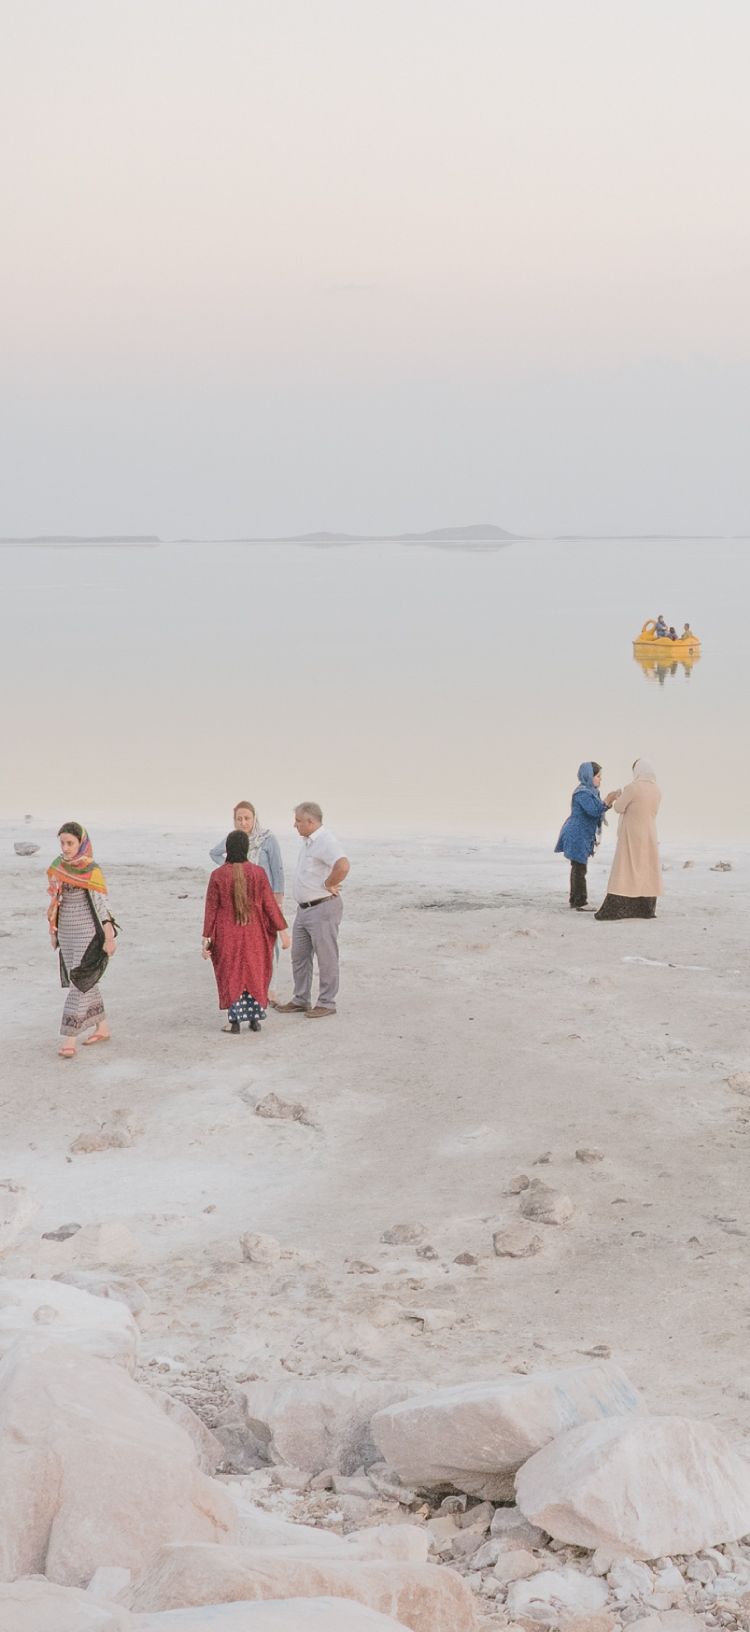 Maximilian Mann Captures a Disappearing Lake & Other Casualties of Climate Change